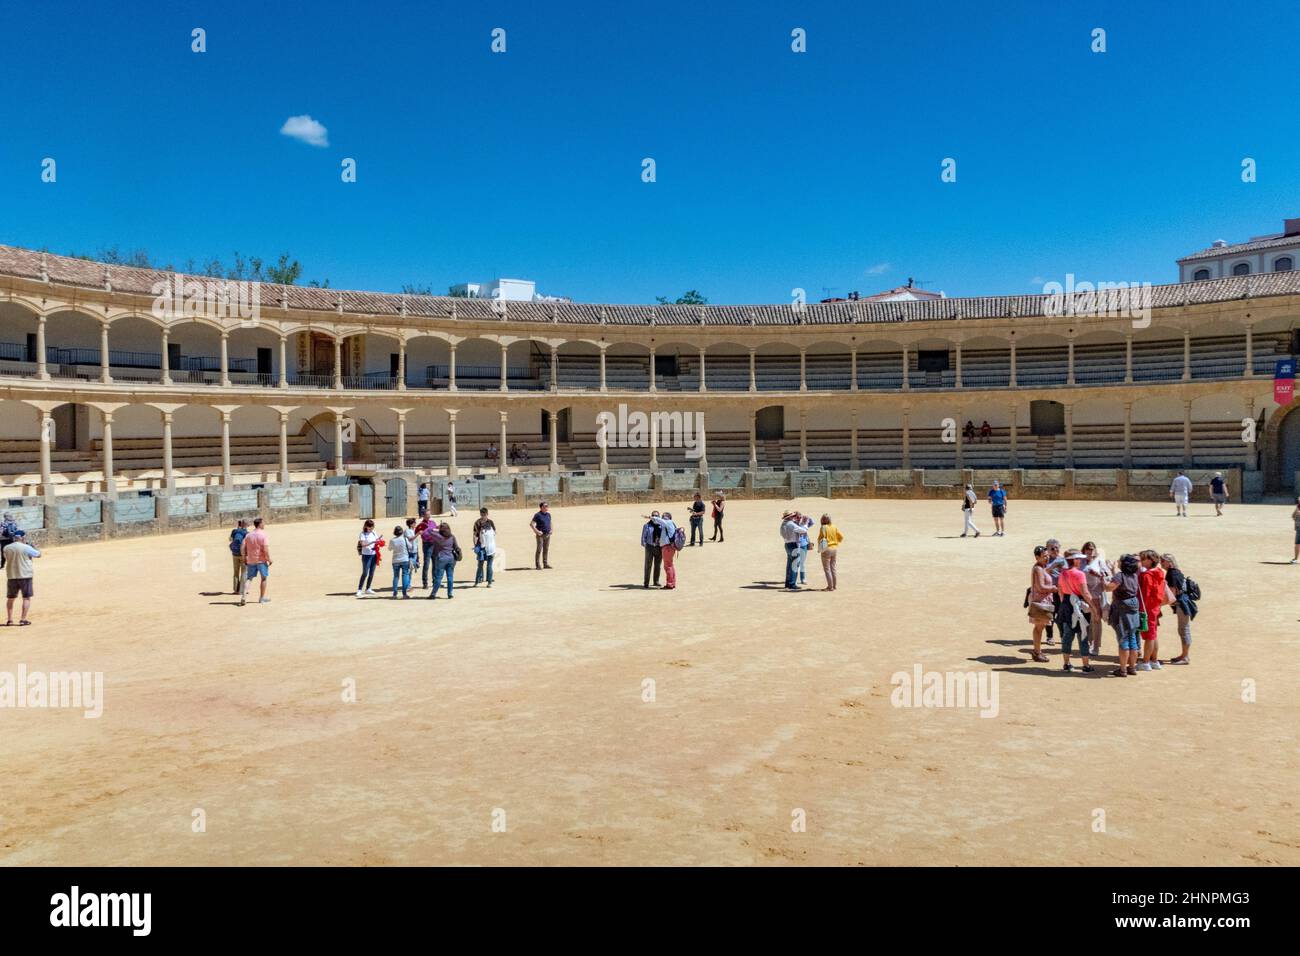 Visitors to the Plaza de Toros or Bullring. The bullring at Ronda is the oldest bullfighting ring in Ronda Stock Photo